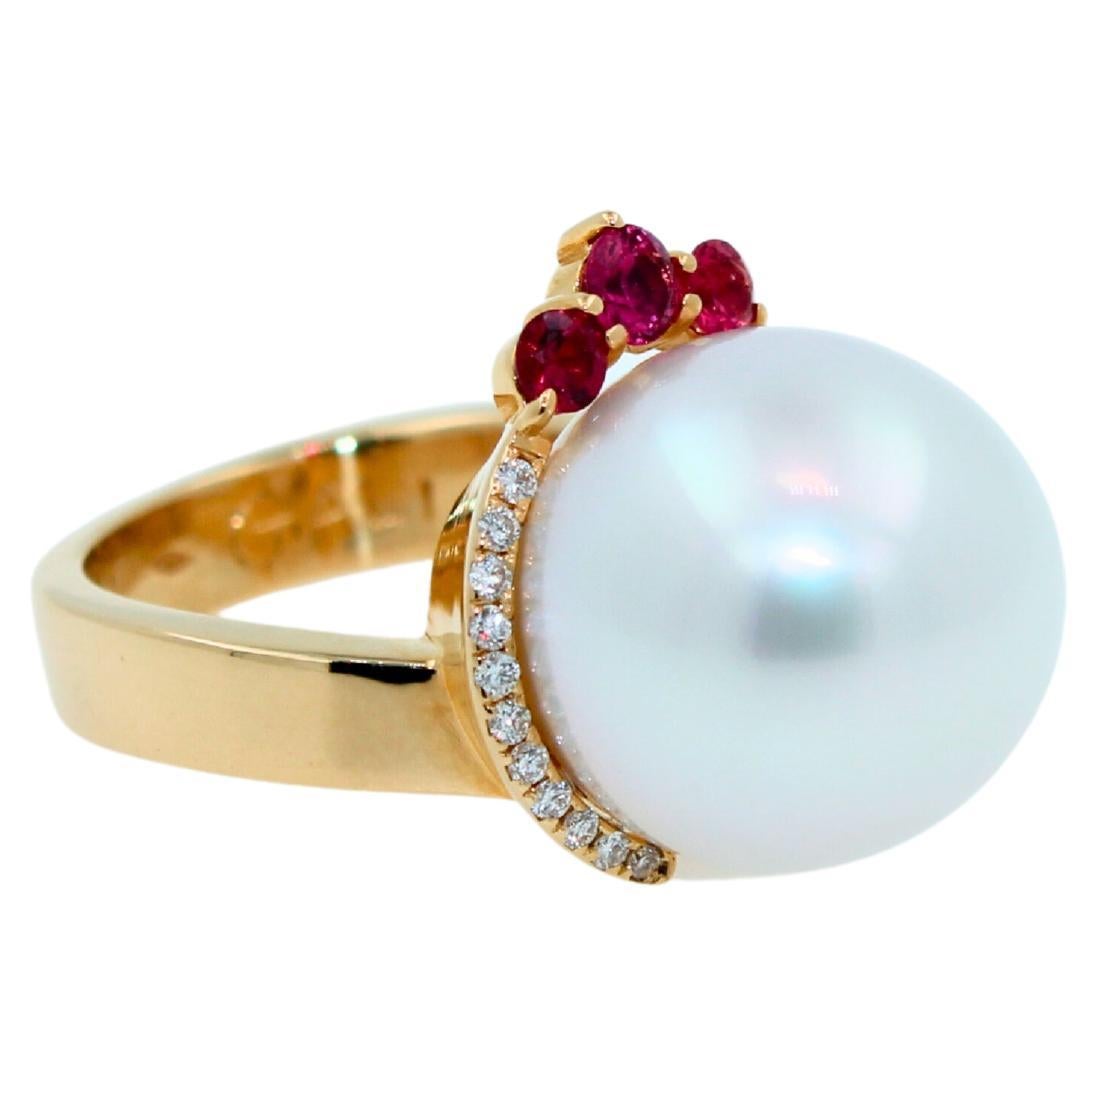 Round Cut White South Sea Pearl Diamond Halo Comet Form Pink Red Spinel 18 Karat Gold Ring For Sale